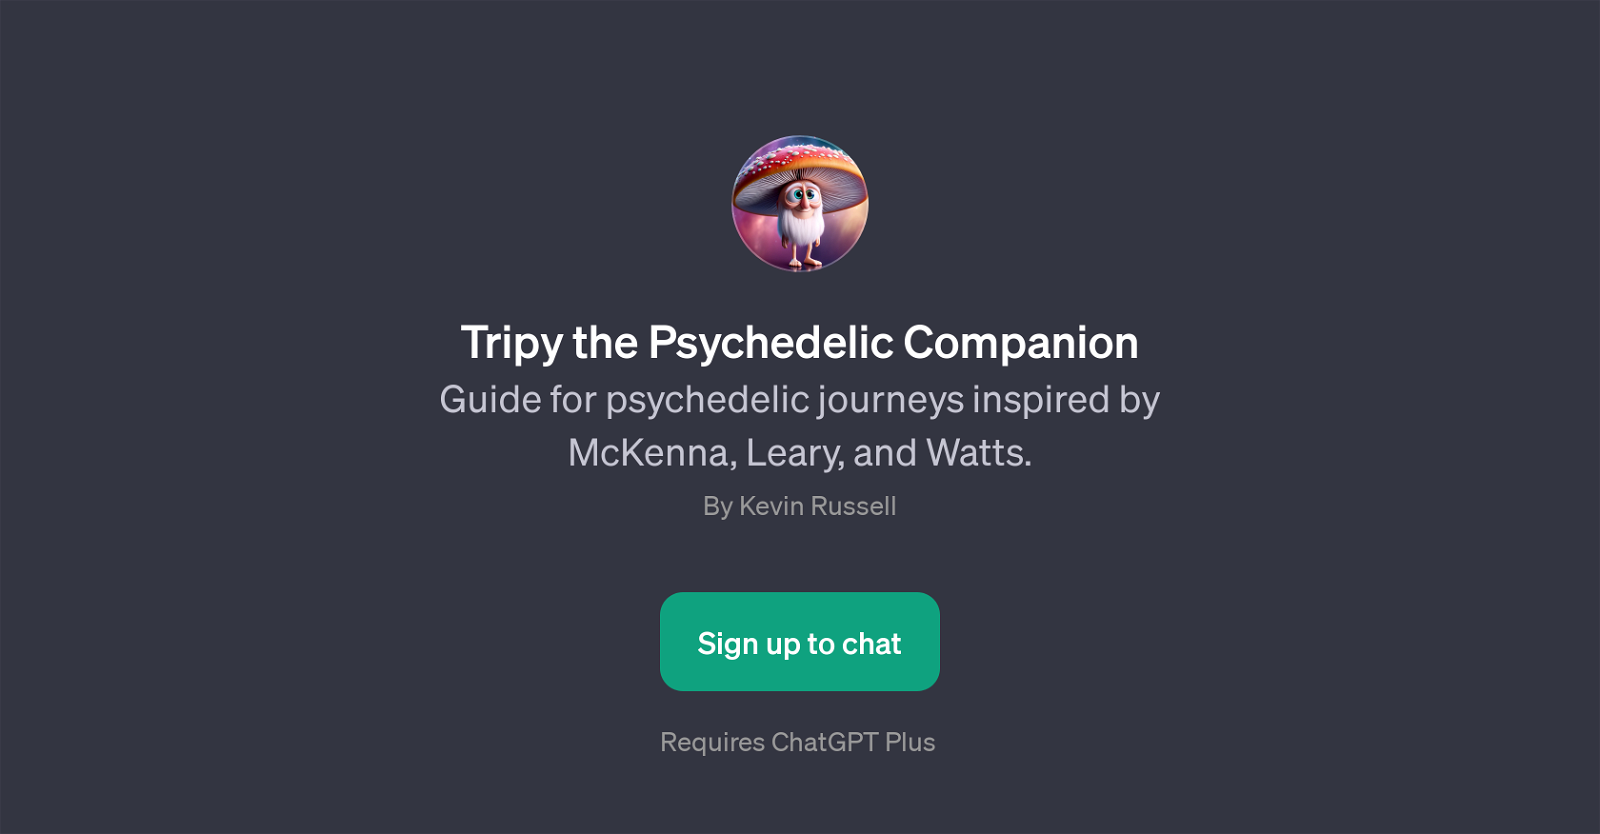 Tripy the Psychedelic Companion website